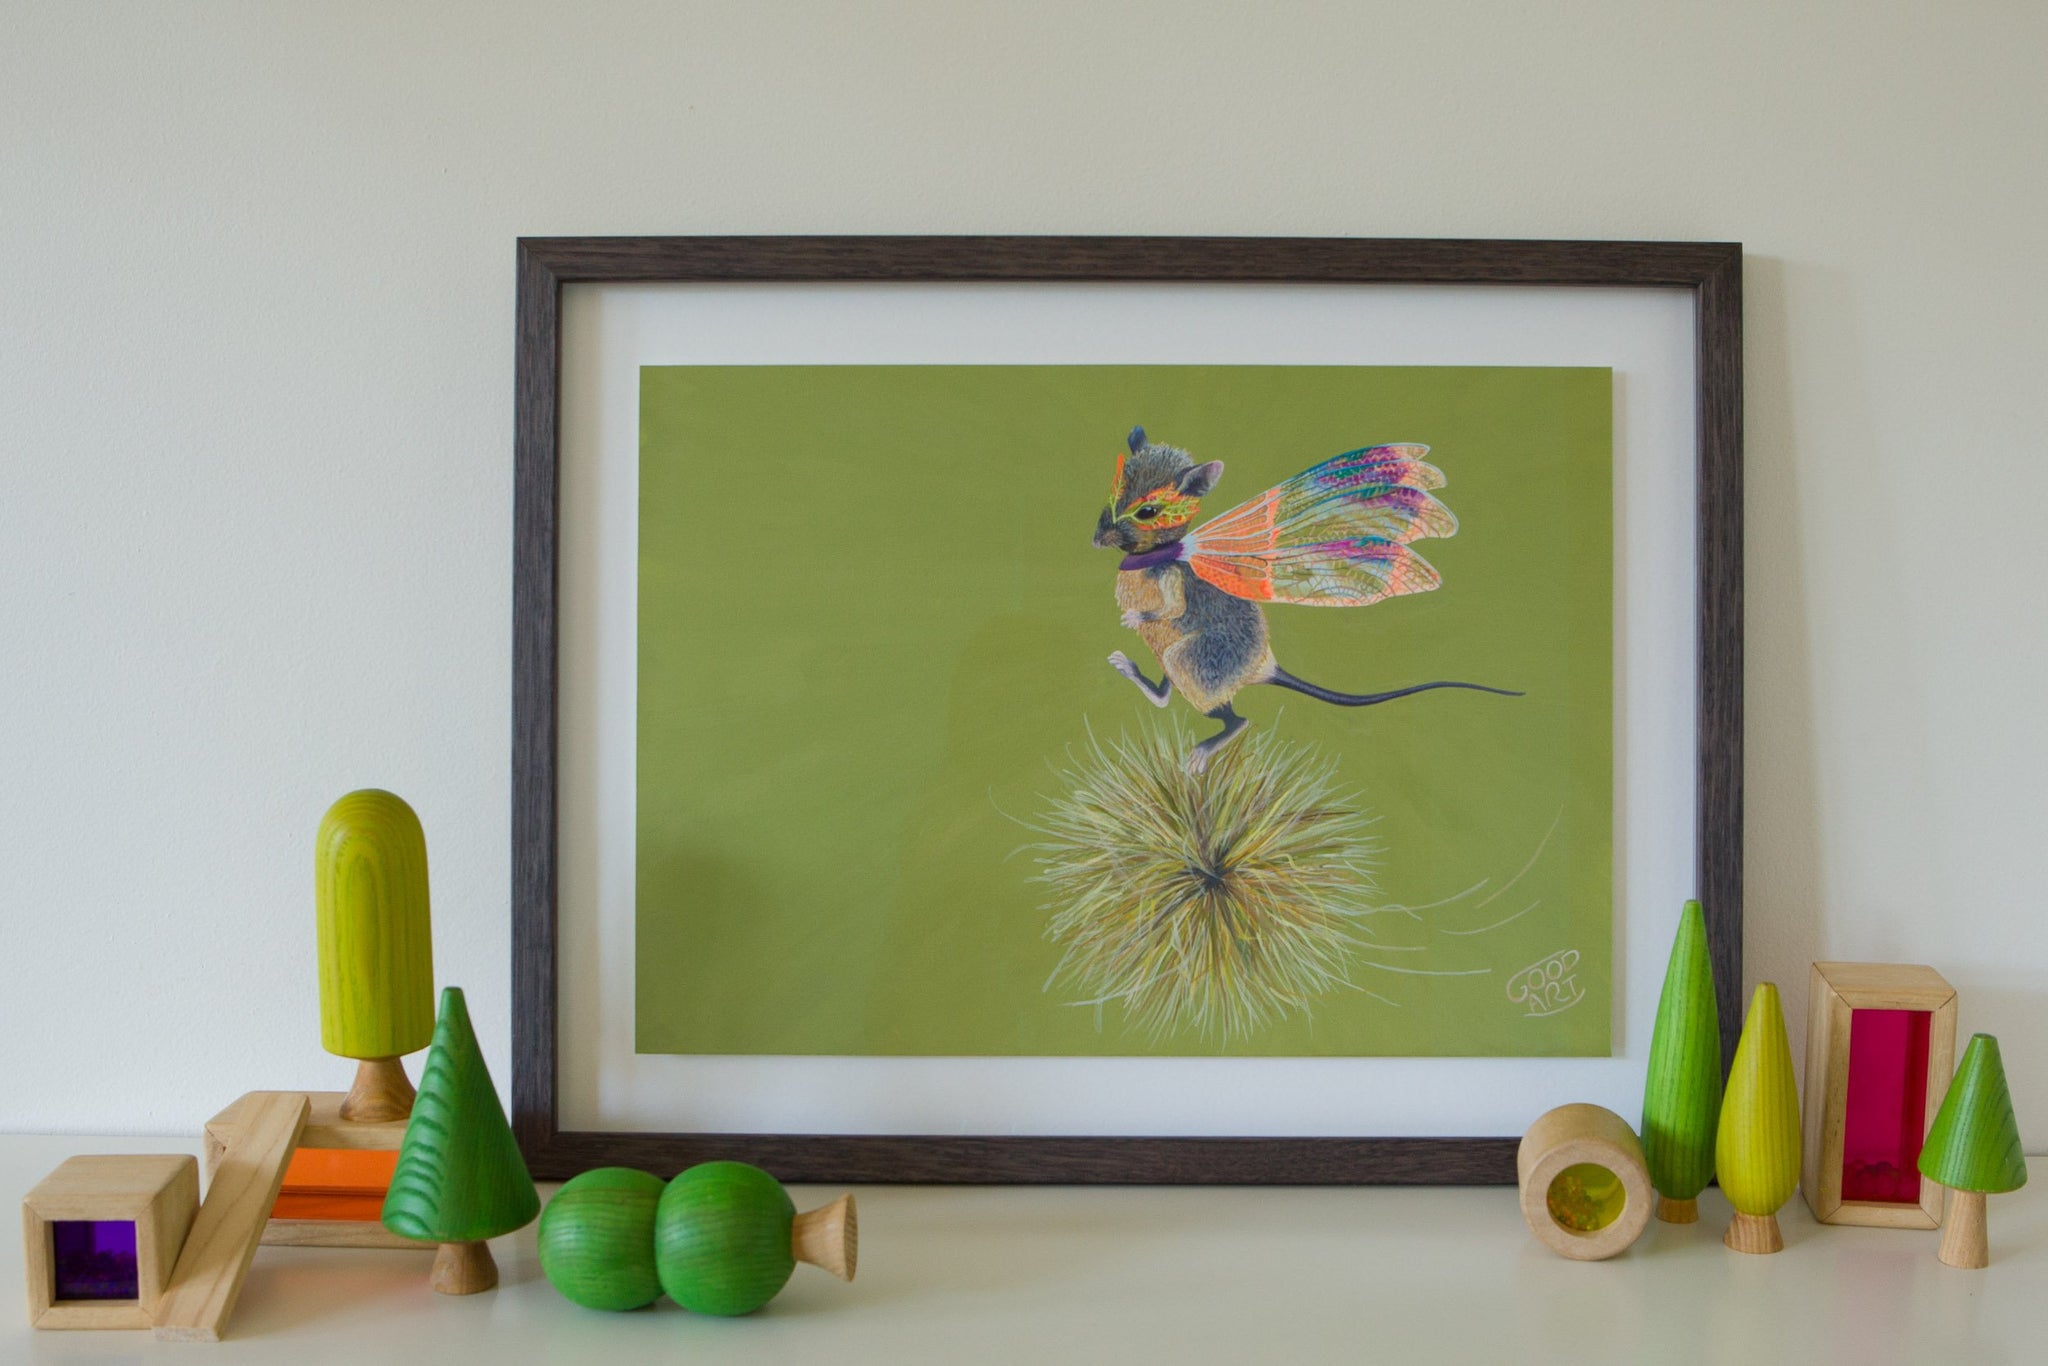 Western Australian marsupial, the Dunnart. Mouse-like in appearance. In this artwork the Dunnart wearing a set of dragonfly wings runs along on top of a spinning spinifix. A predominately olive coloured background. Artwork sits on shelf amongst wooden kids toys. Kids prints painted by artist Jaelle Pedroli.